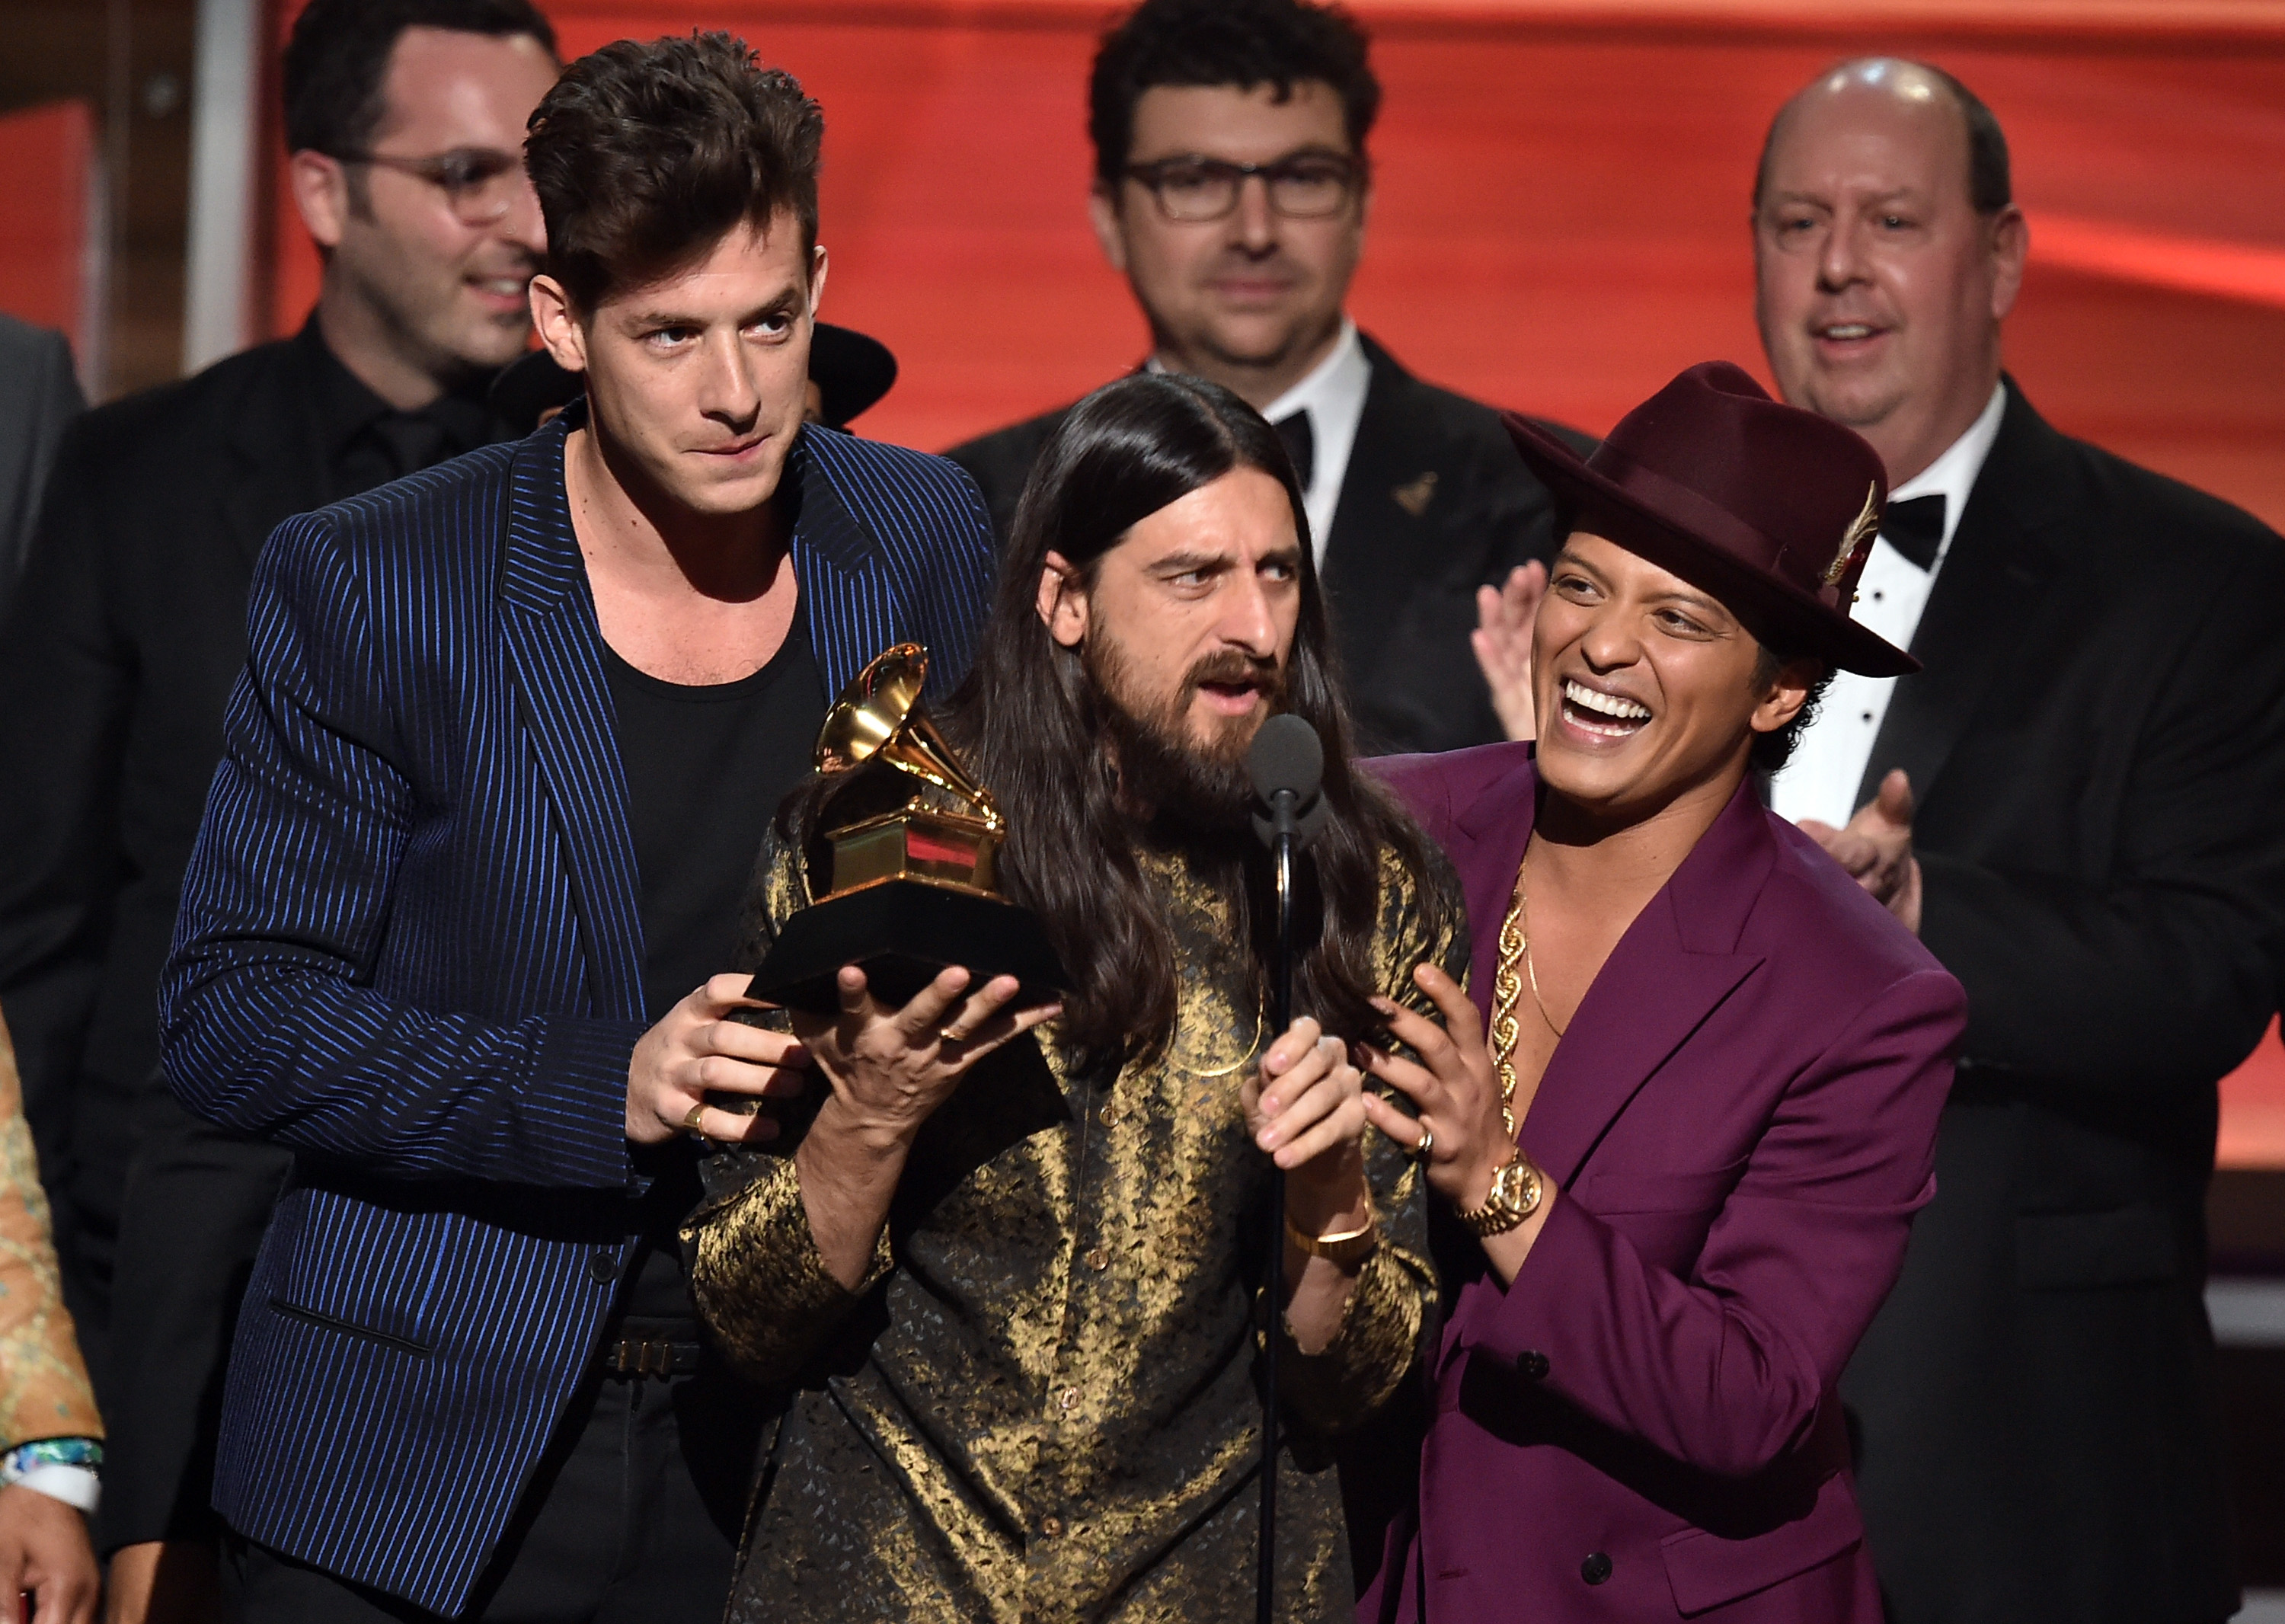 From left: Mark Ronson, Jeff Bhasker, and Bruno Mars accept "Record Of The Year" during the 58th GRAMMY Awards at Staples Center on Feb. 15, 2016 in Los Angeles. (Kevin Winter—Getty Images)